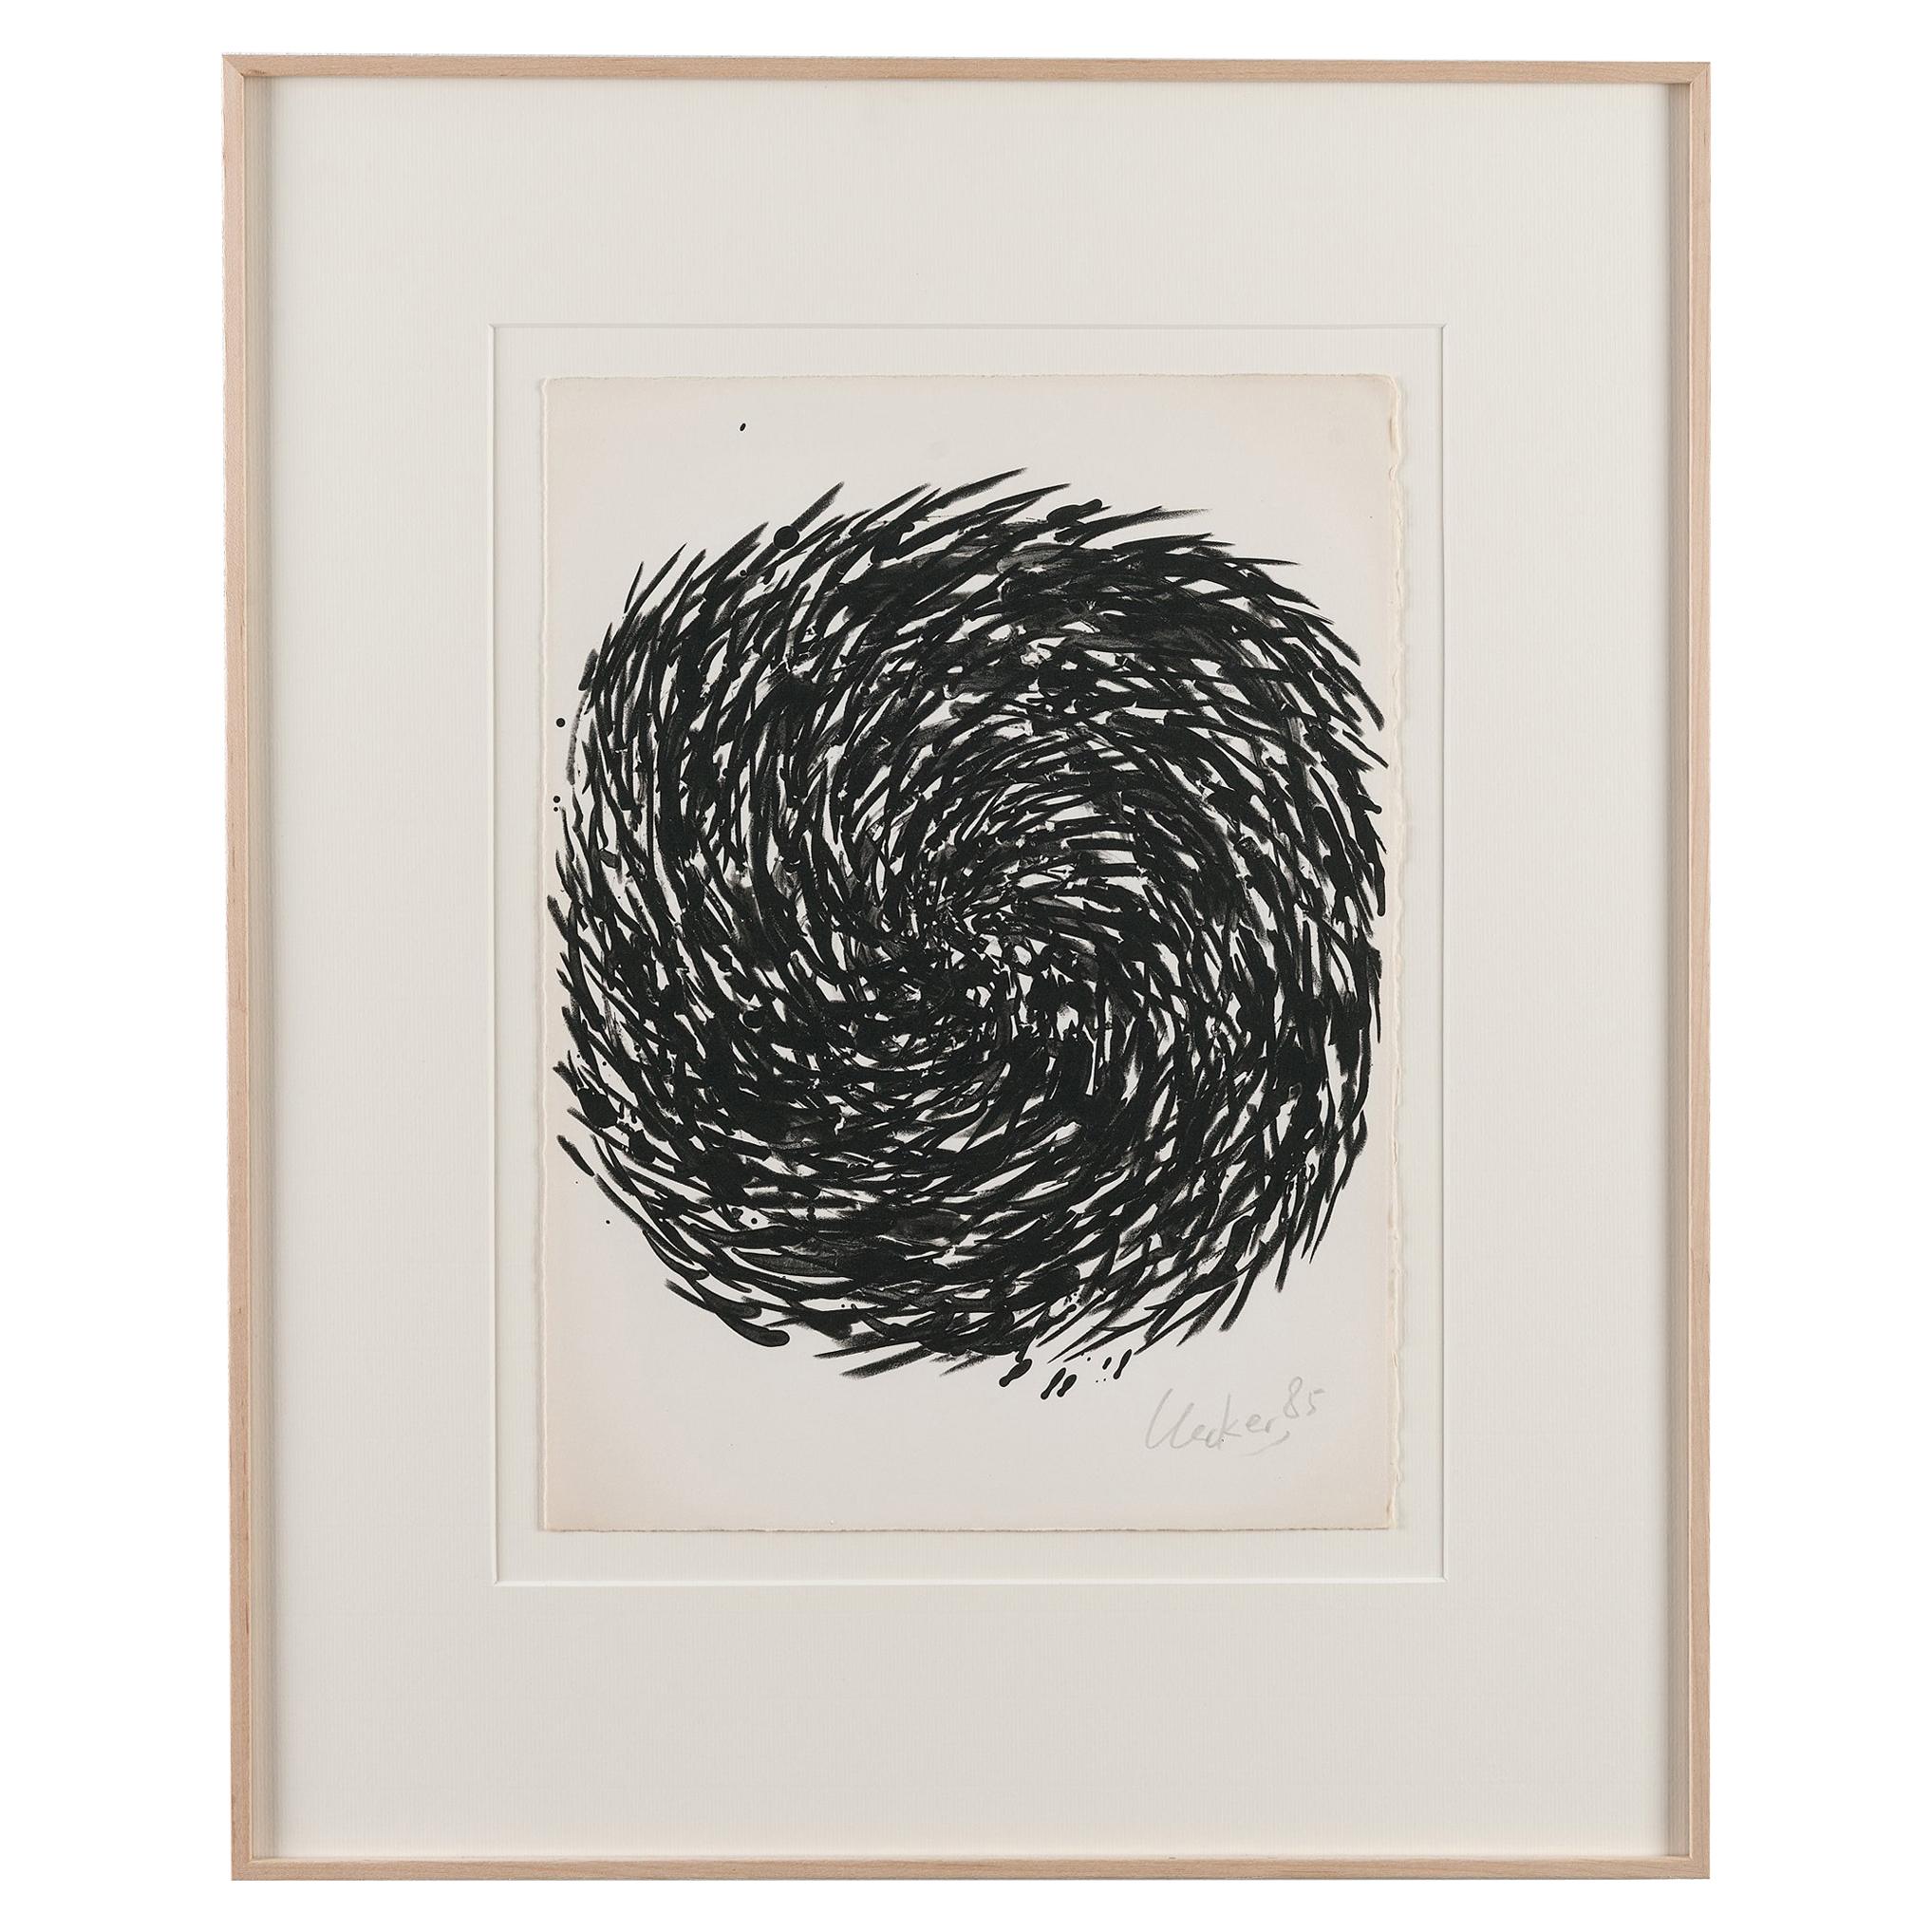 Günther Uecker Spiral, Original Lithograph, Signed and Numbered